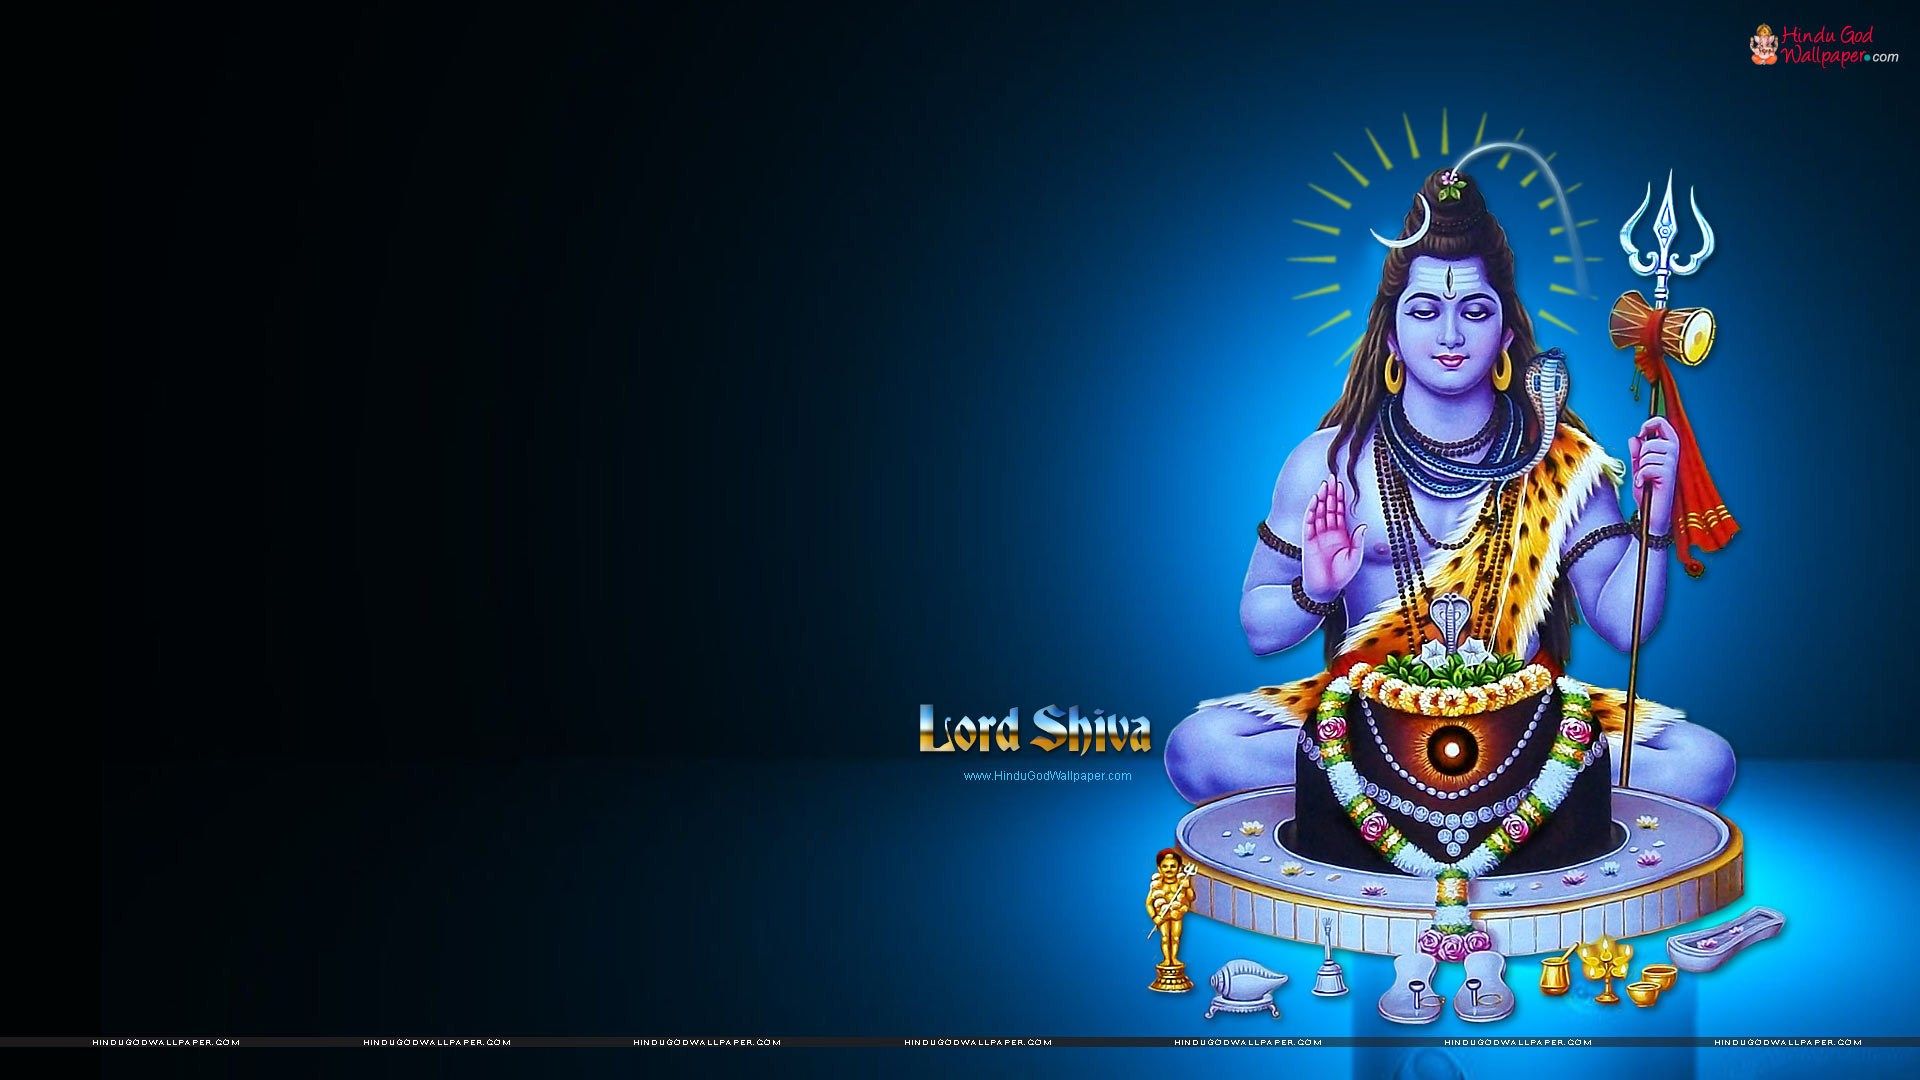 LORD SHIVA HD WALLPAPERS 1920X1080 DOWNLOAD